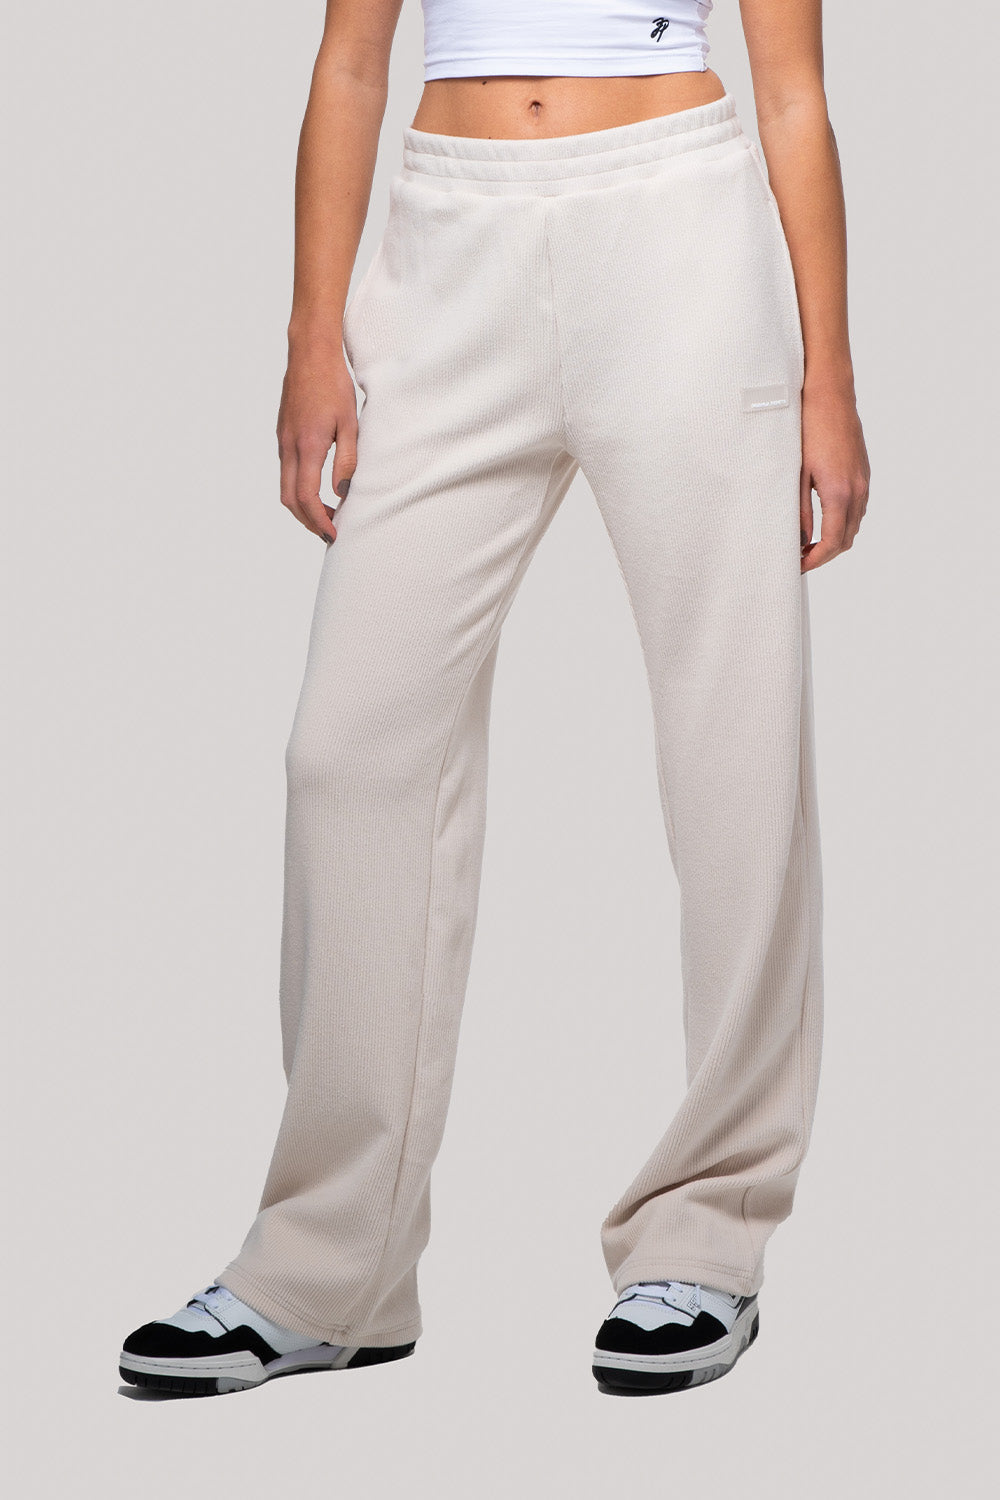 Alex - Relaxed Fit Pant